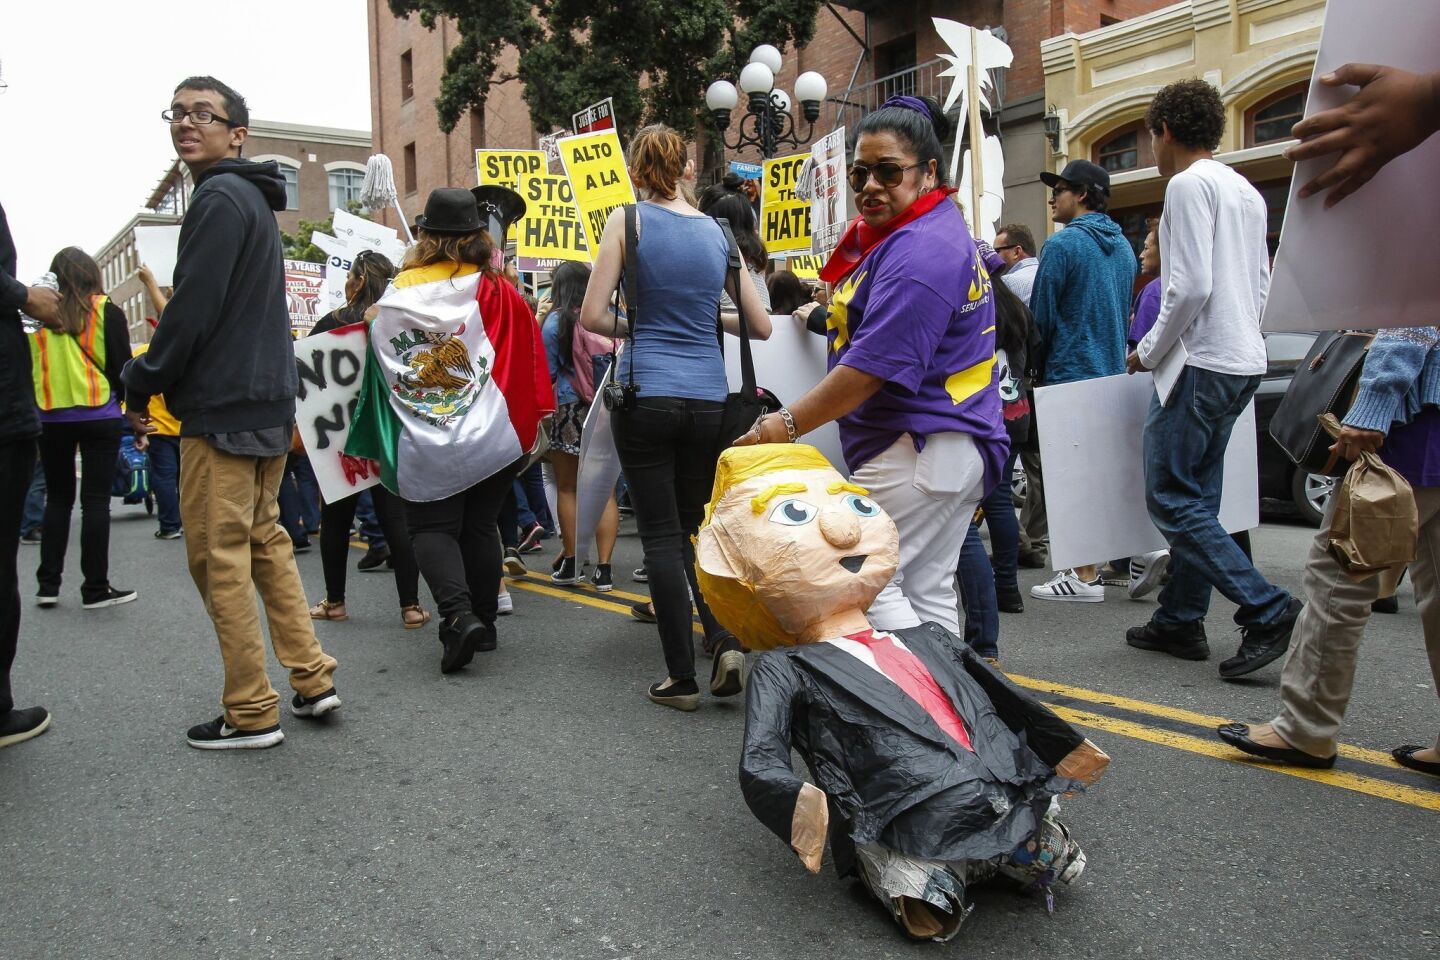 One protester carries a piñata in the likeness of Donald Trump as a group of anti-Trump protesters march down 5th Avenue as they head toward the San Diego Convention Center.